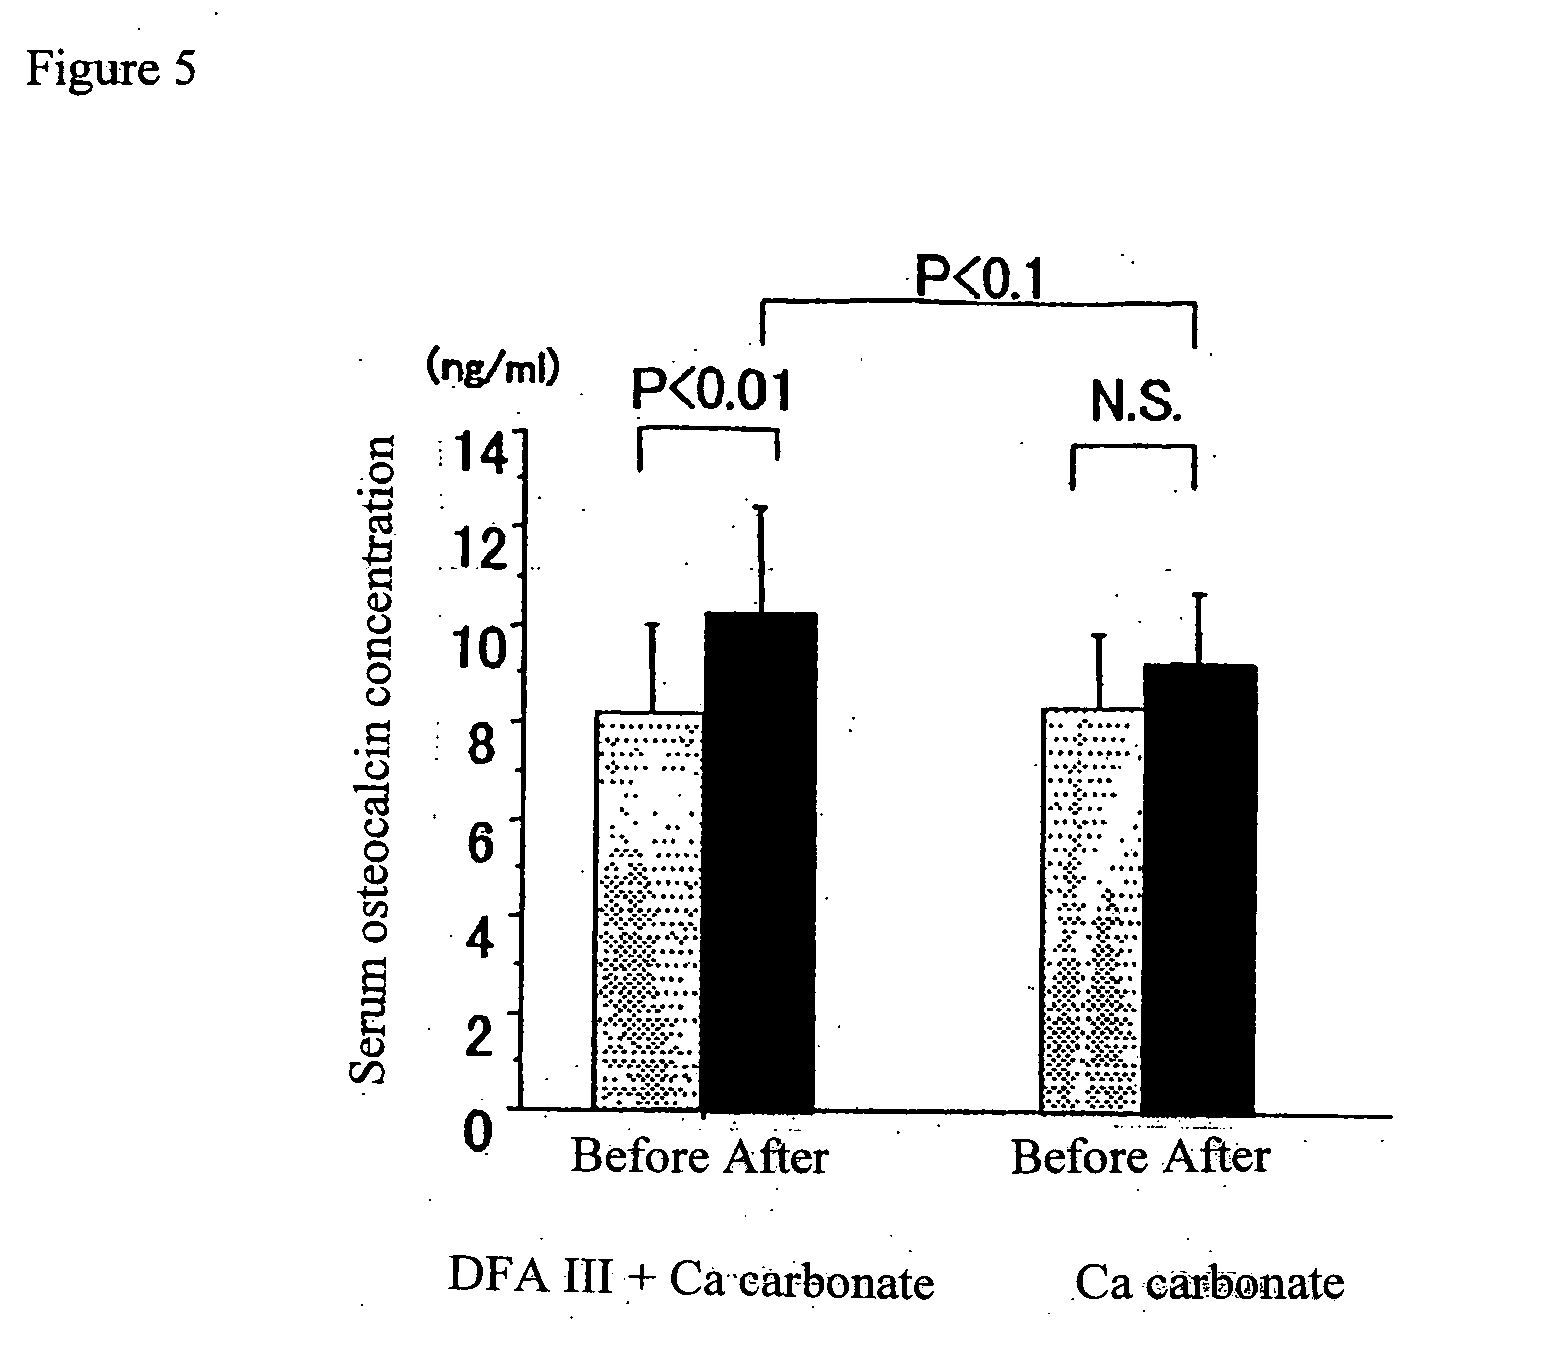 Diructose anhydride-containing composition and use thereof